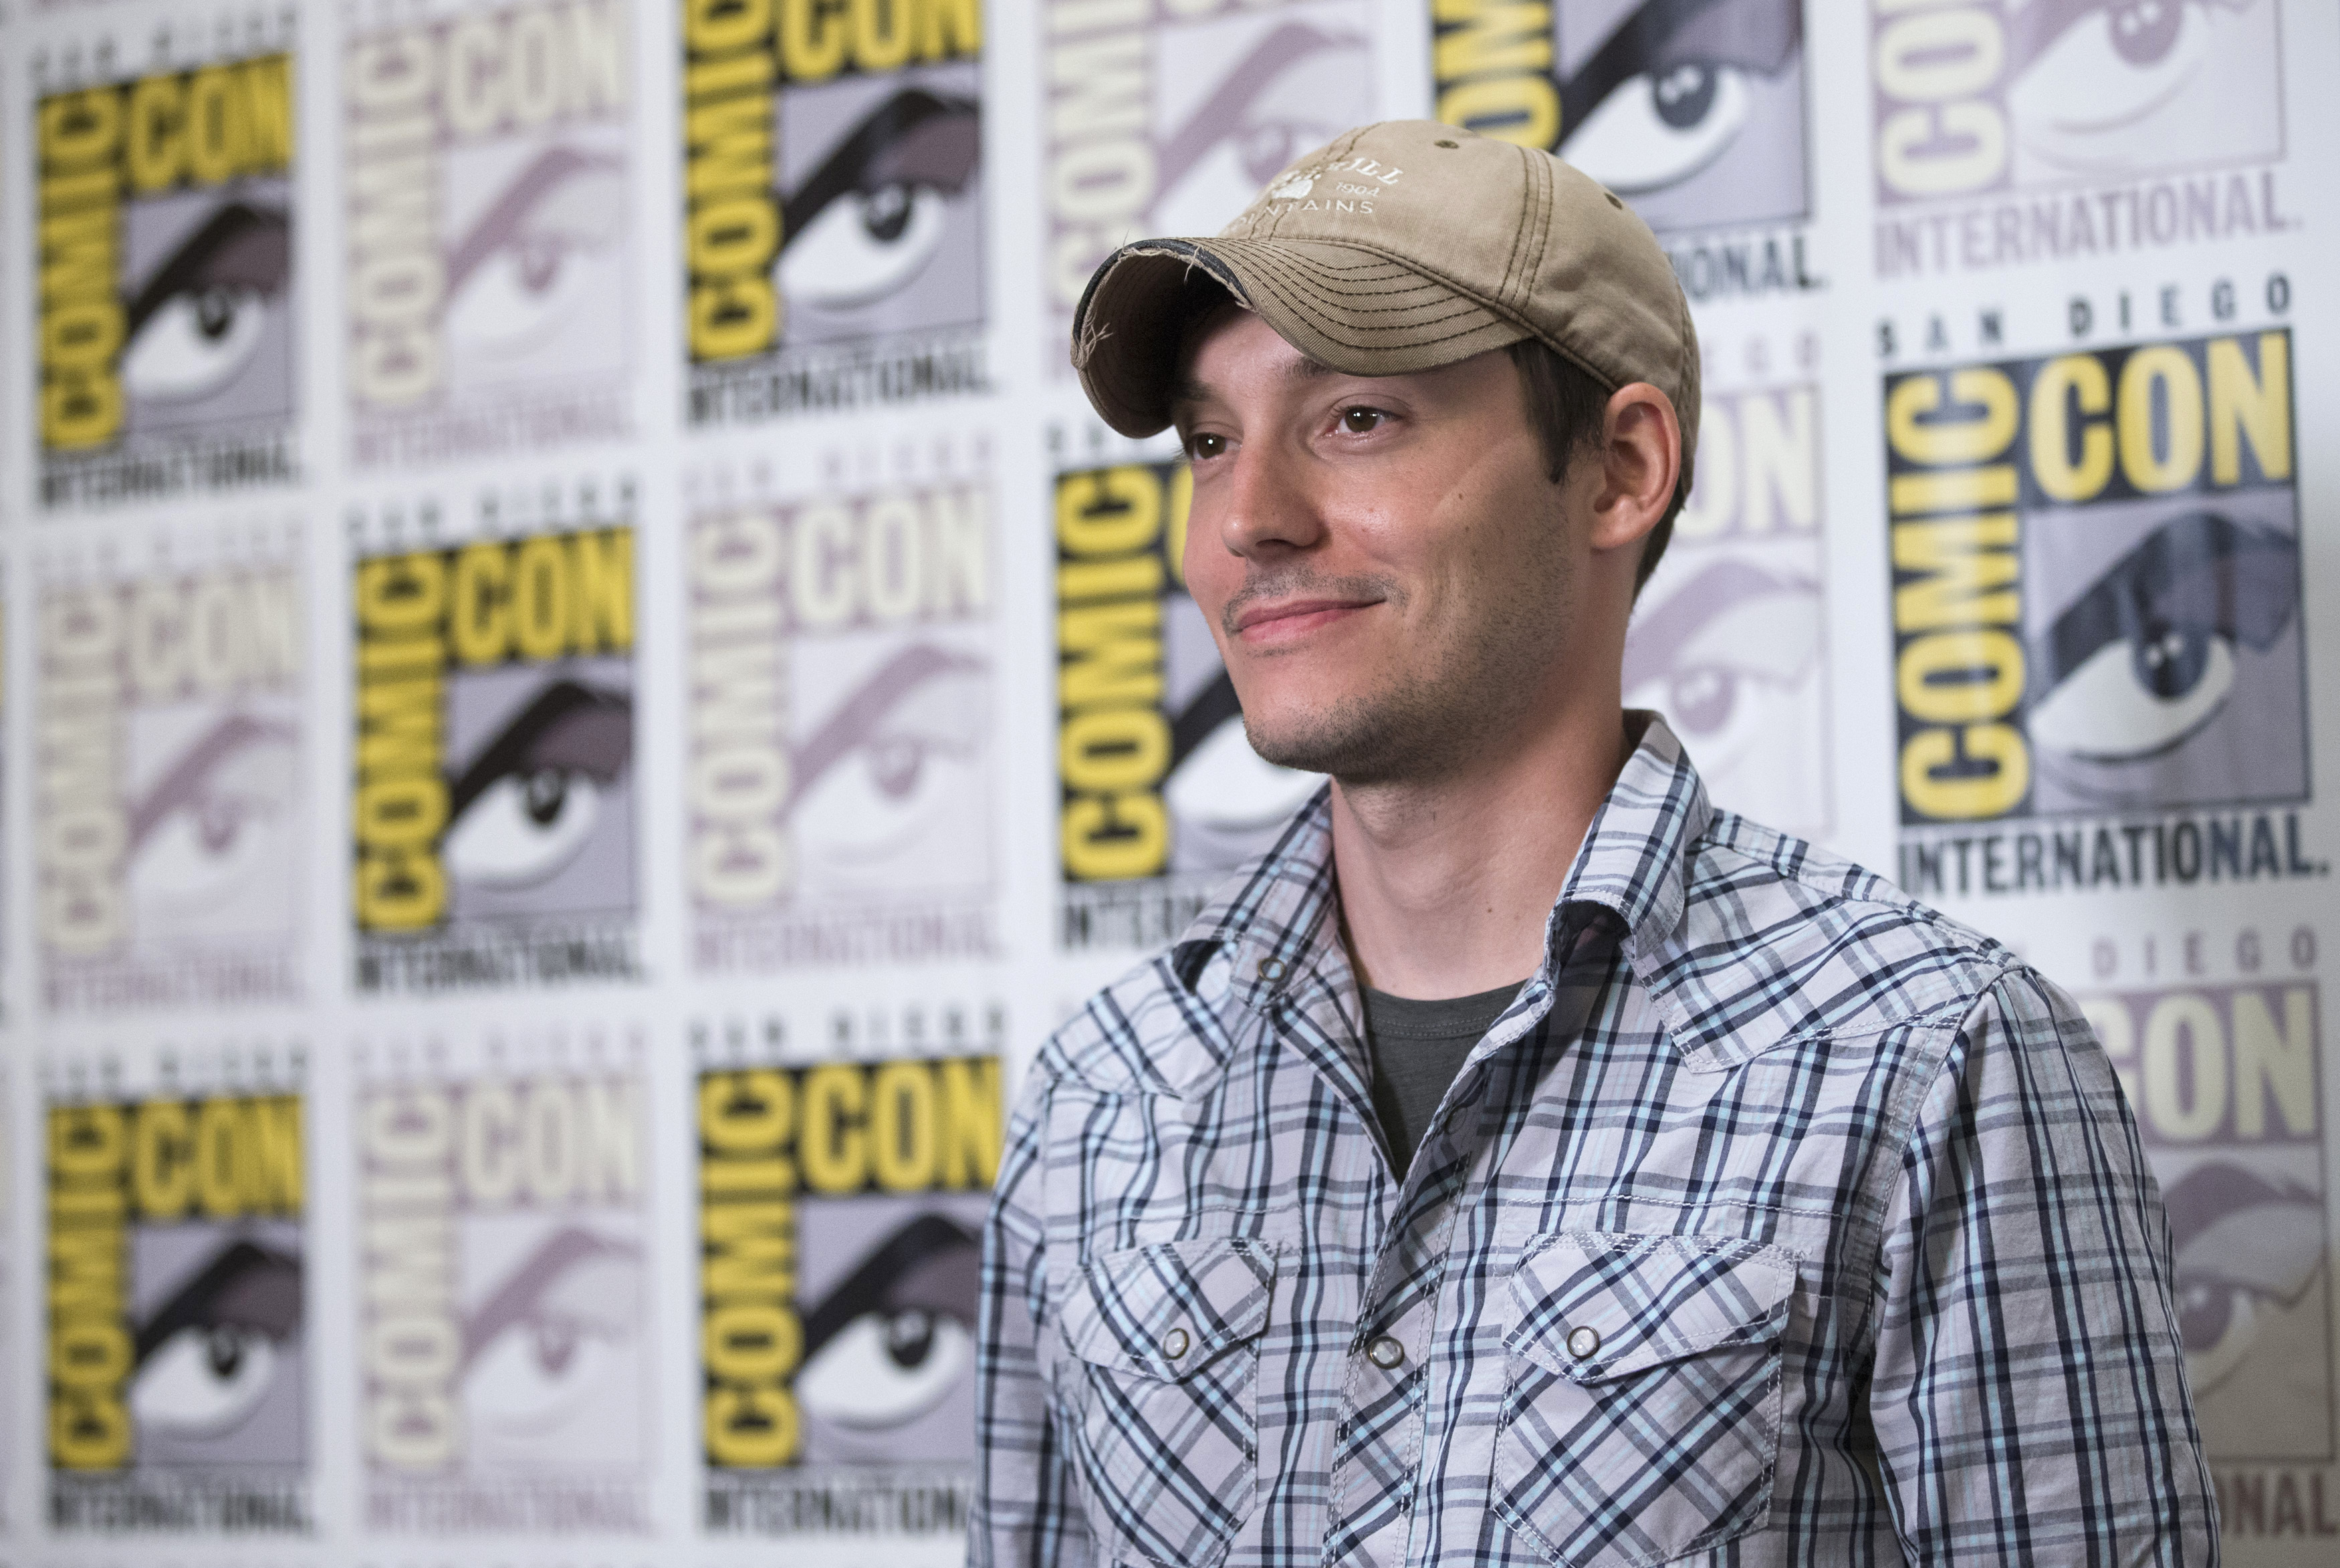 Director Ball poses at a press line for "The Maze Runner" during the 2014 Comic-Con International Convention in San Diego